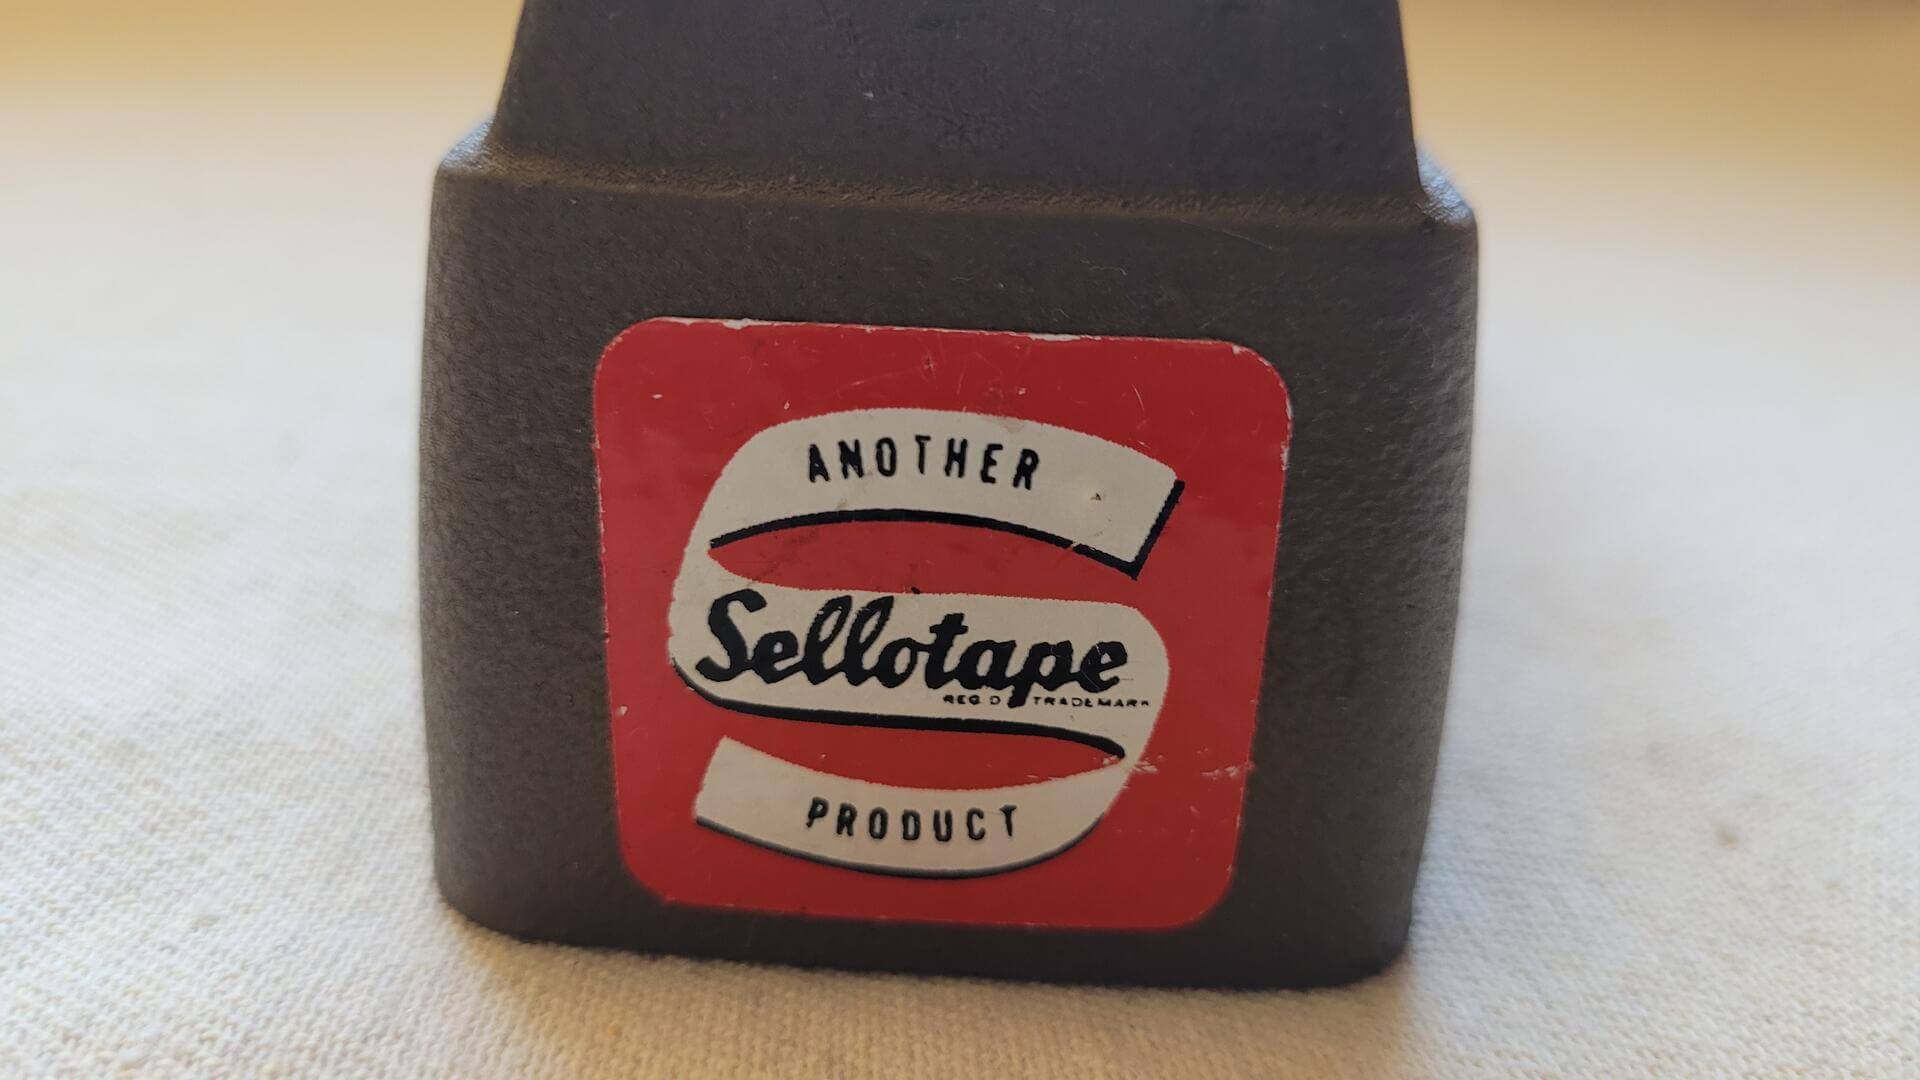 Very Rare antique 1950s mid century Sellotape cast steel tape dispenser. Vintage made in England collectible retro office tools and equipment